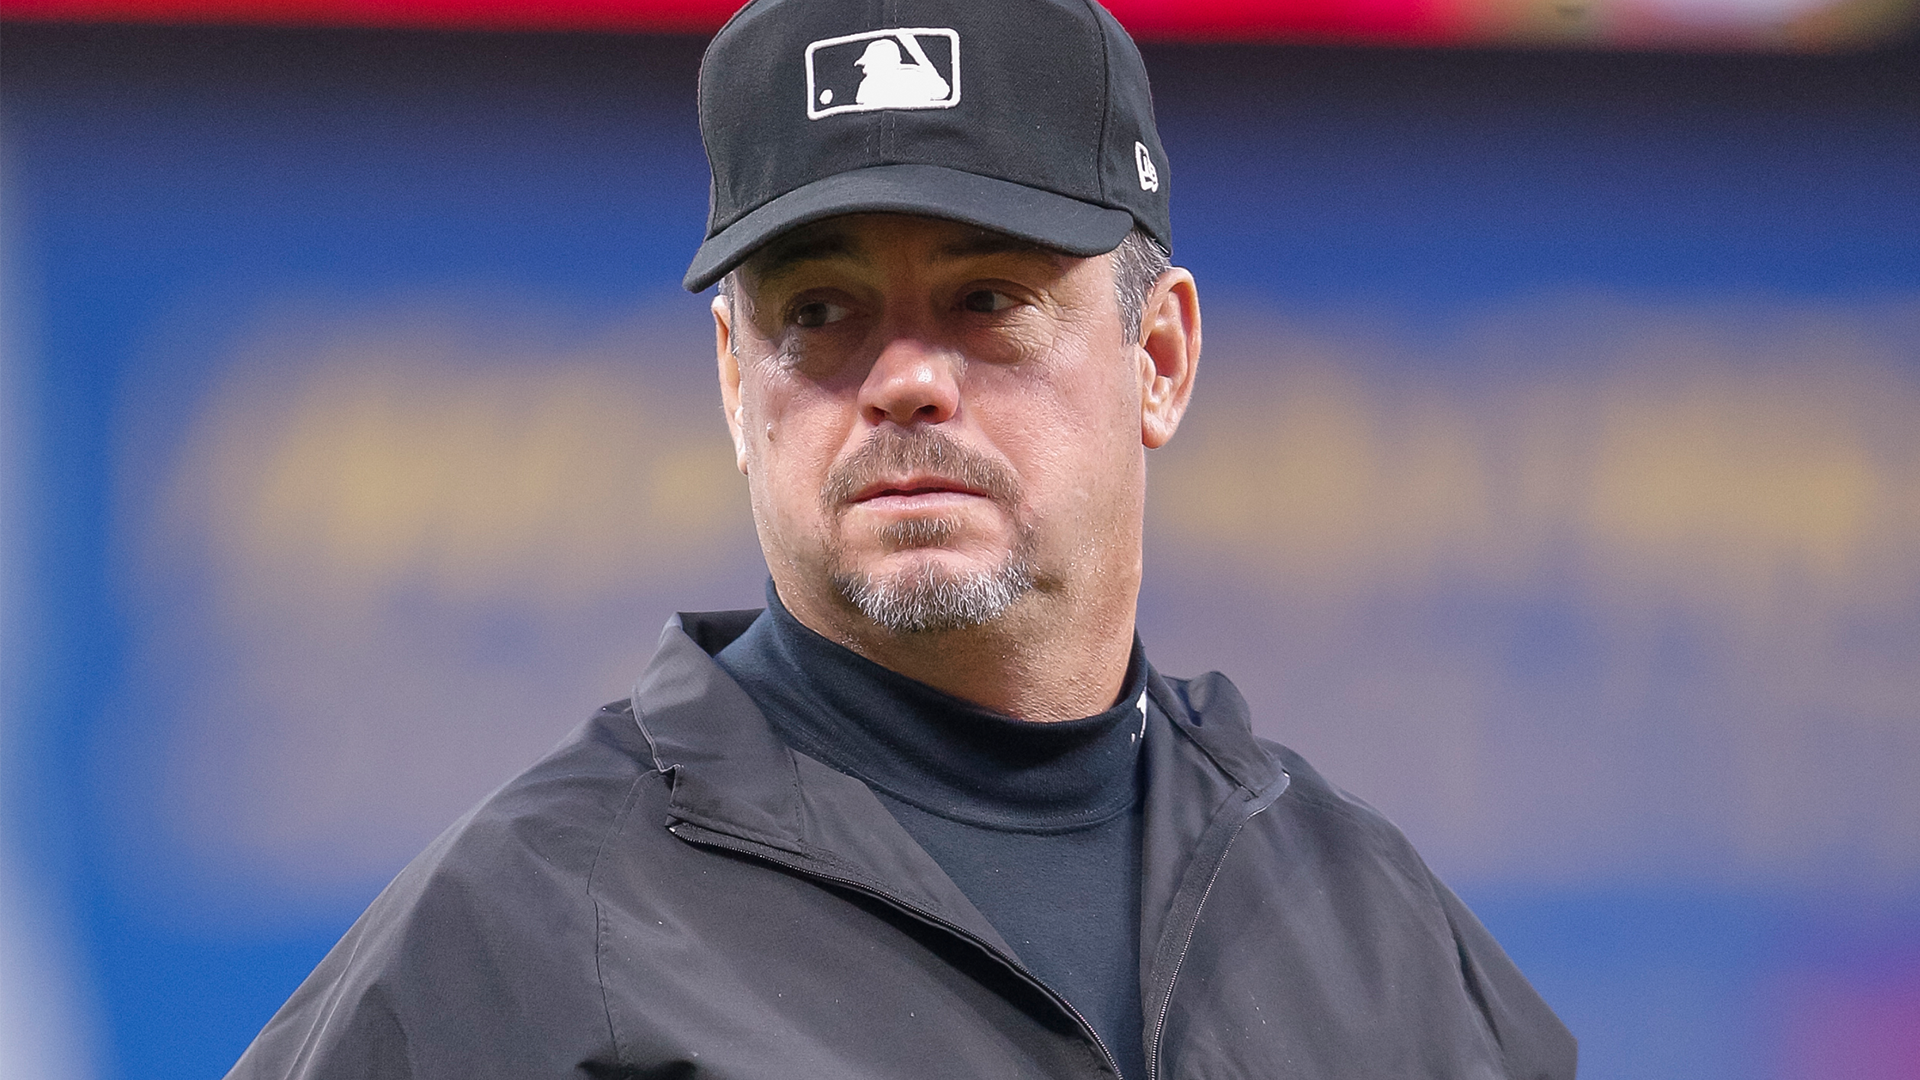 MLB Umpire Apologizes For Tweet Referencing Assault Rifle and Civil War